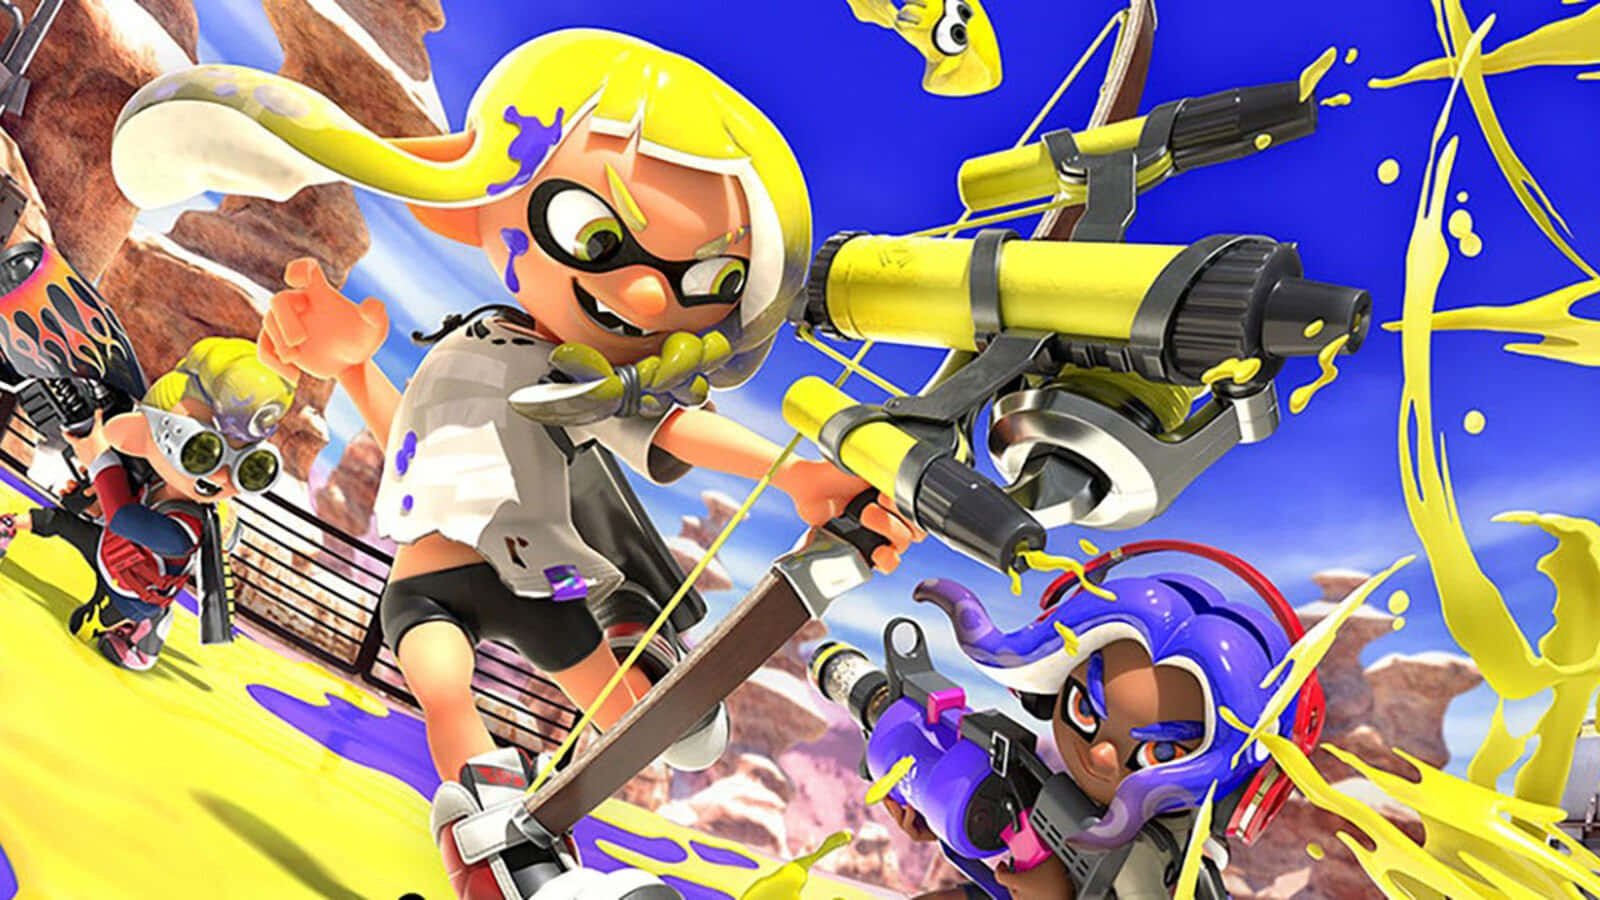 Get ready to get splatted with Splatoon!